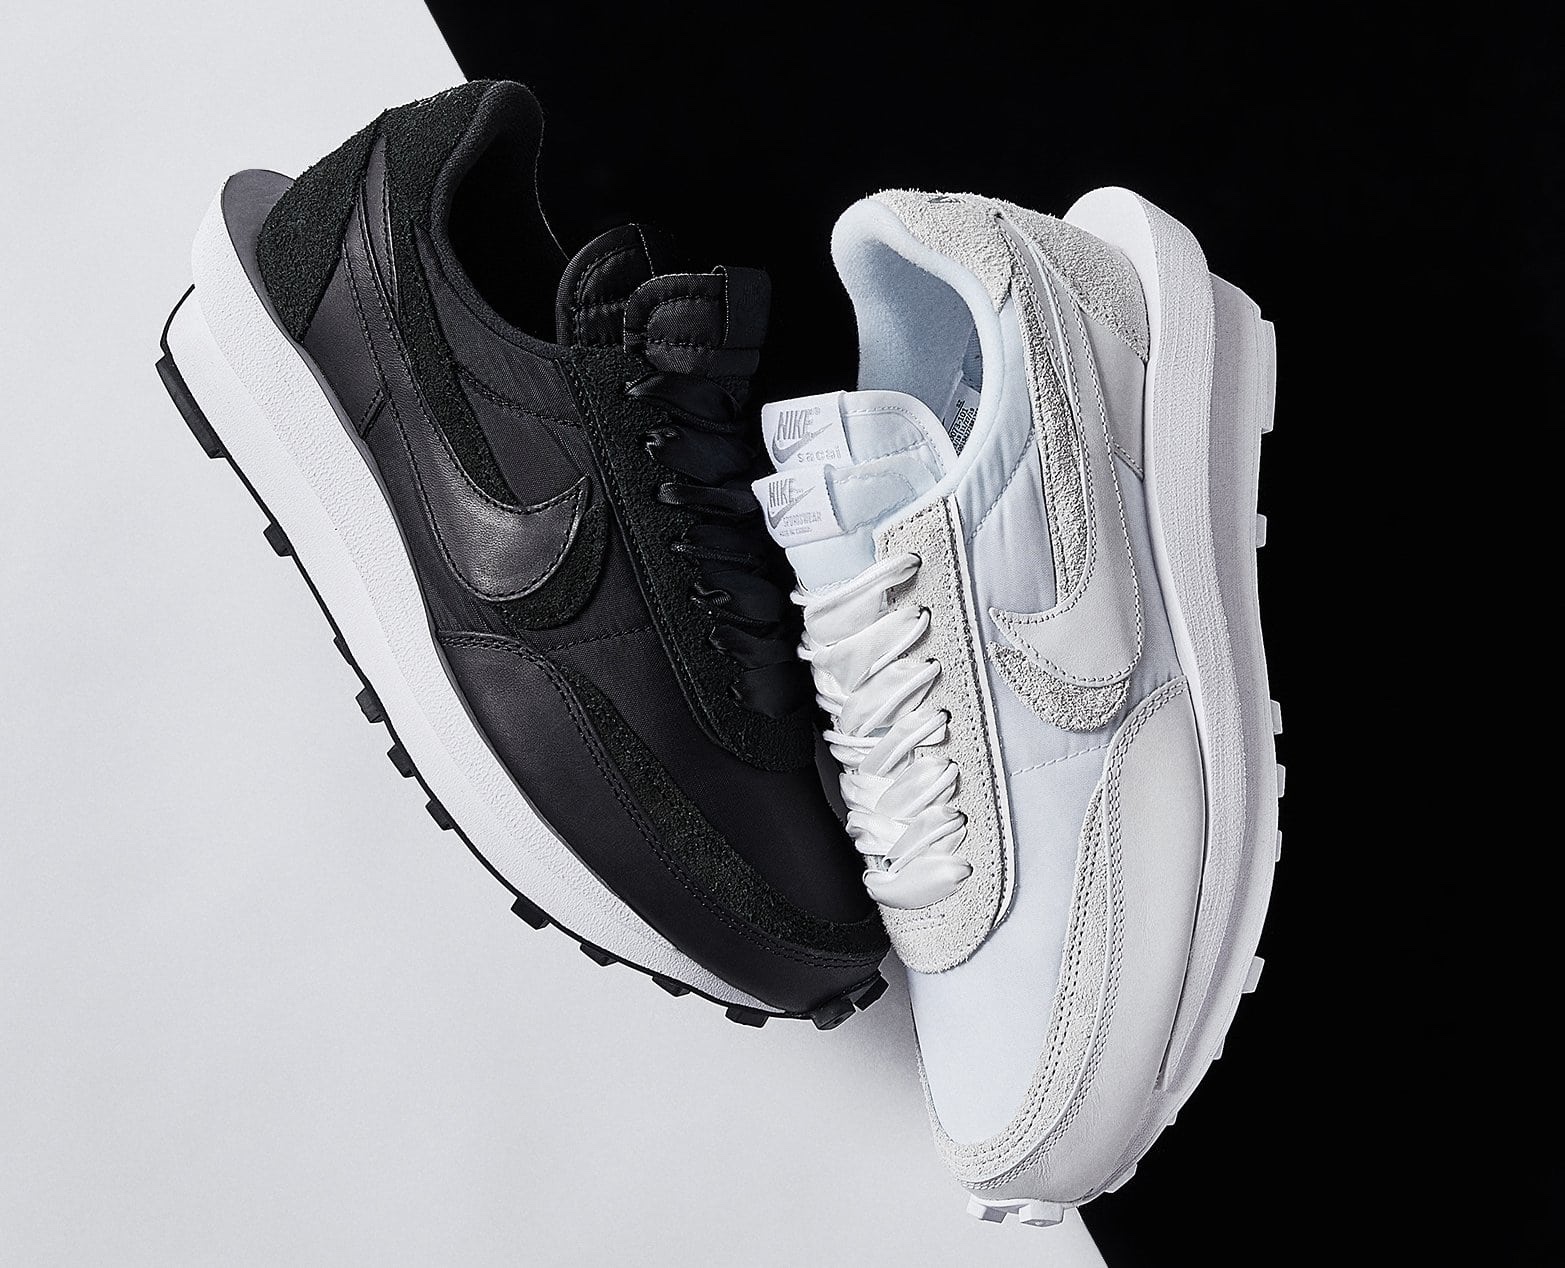 Flop of the Top: sacai x Nike LDWaffle ed il resell calato a picco